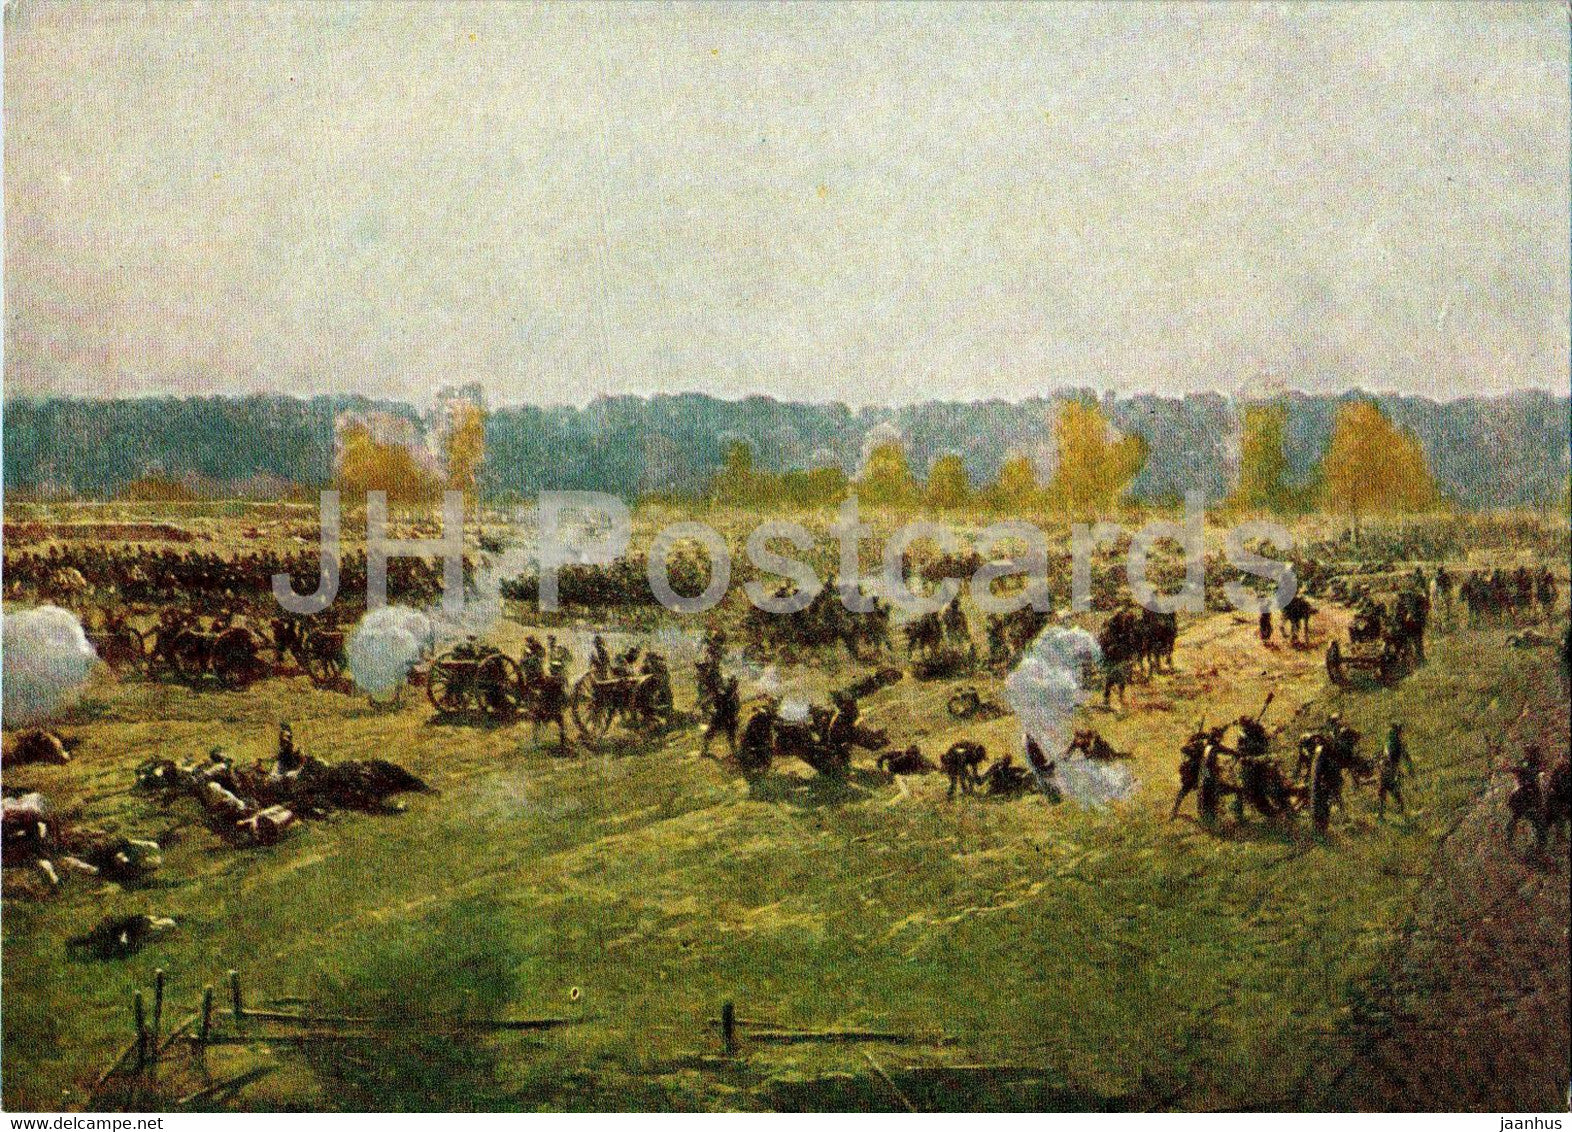 Battle of Borodino - French artillery - panorama - painting by F. Rubo - 1967 - Russia USSR - unused - JH Postcards